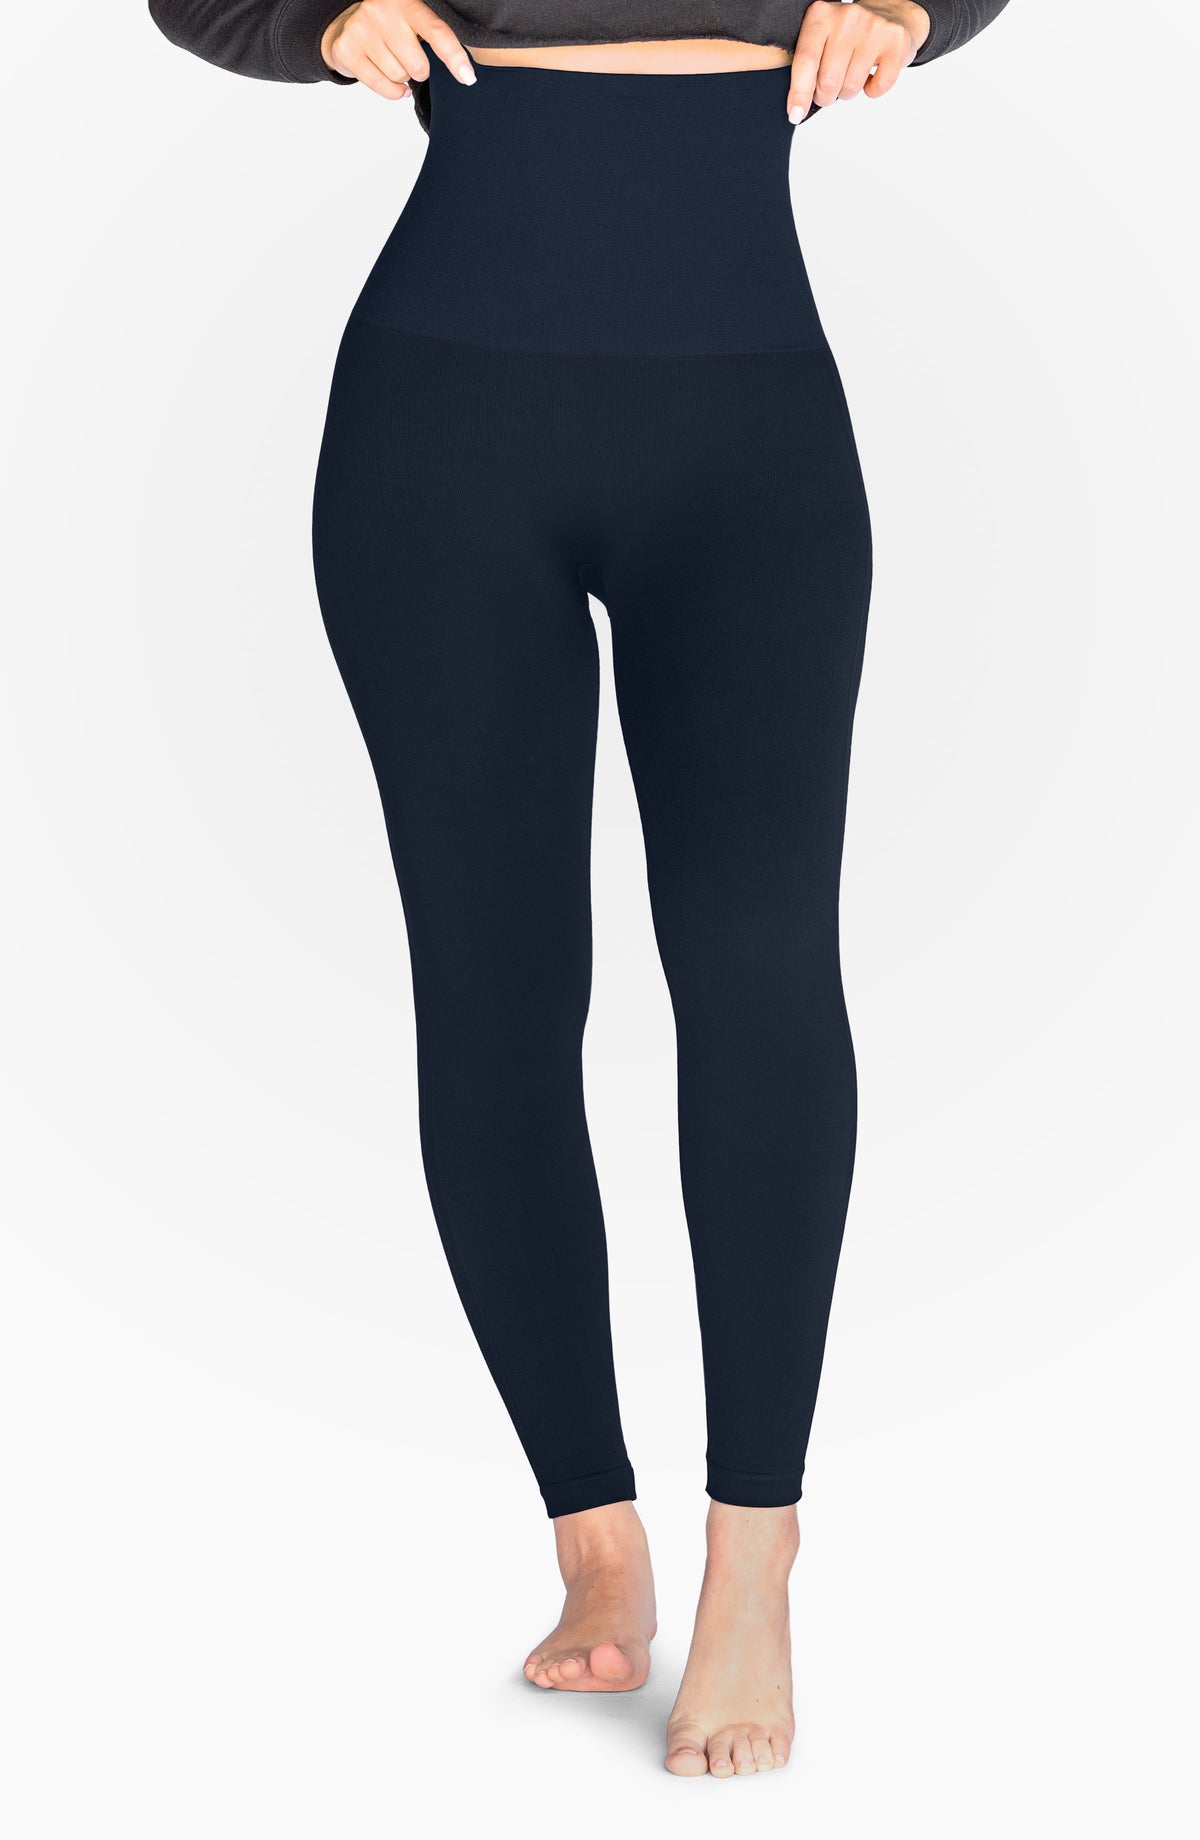 I found my new favorite pair of leggings - they give me a snatched waist,  hide my mom belly, and keep off dog hair